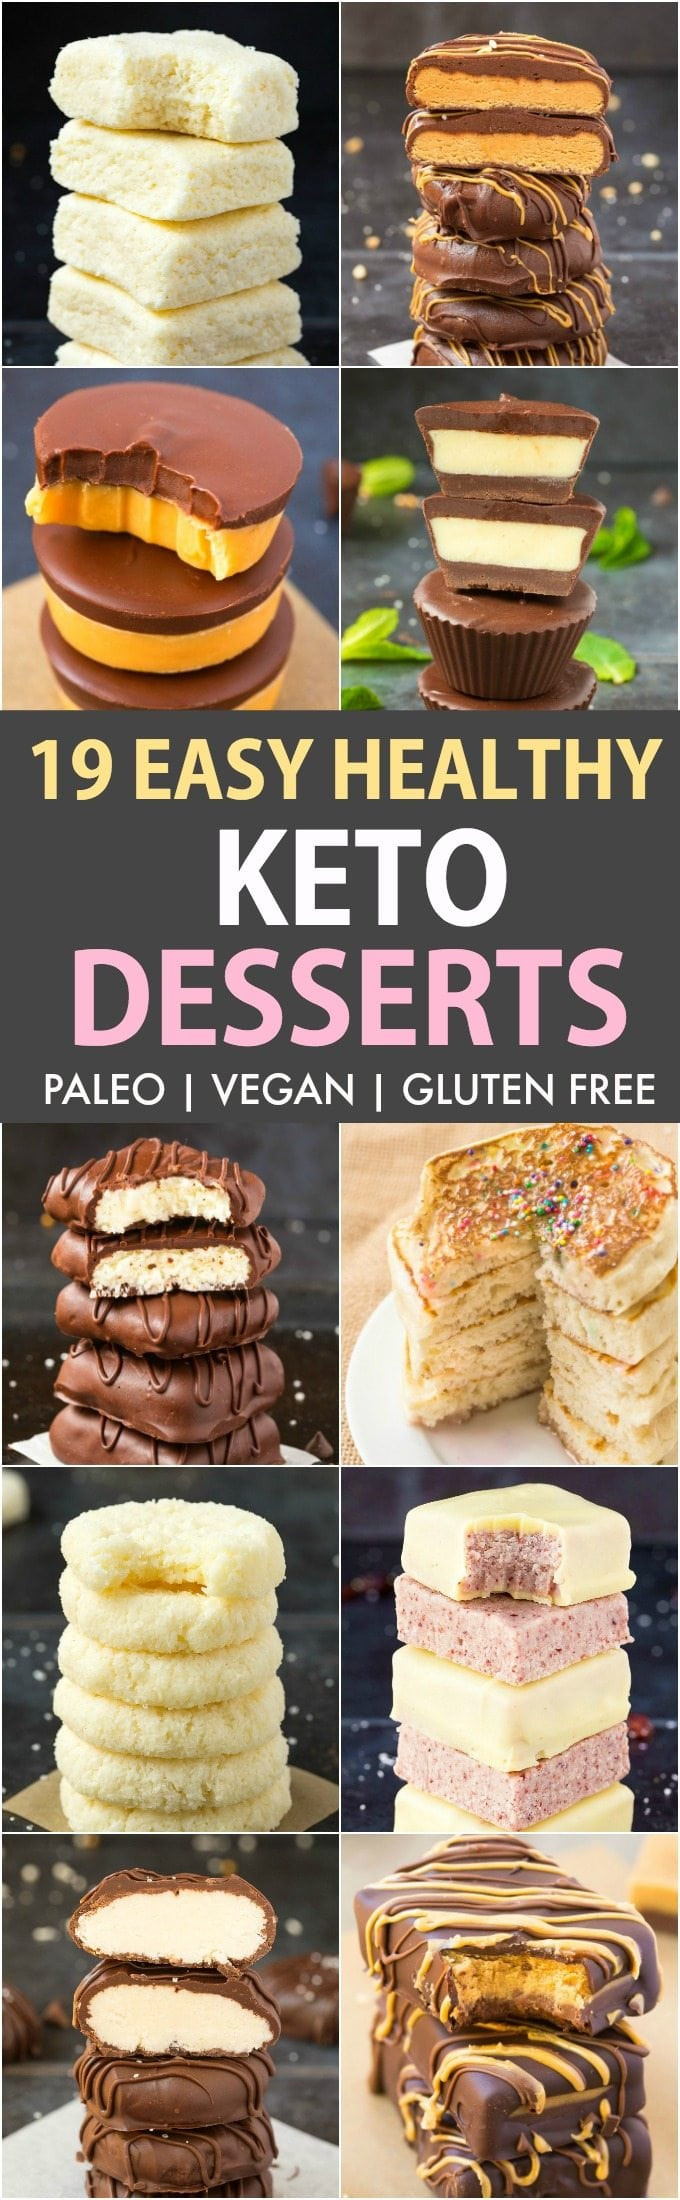 Healthy Keto Snacks Sweet
 19 Easy Keto Desserts Recipes which are actually healthy